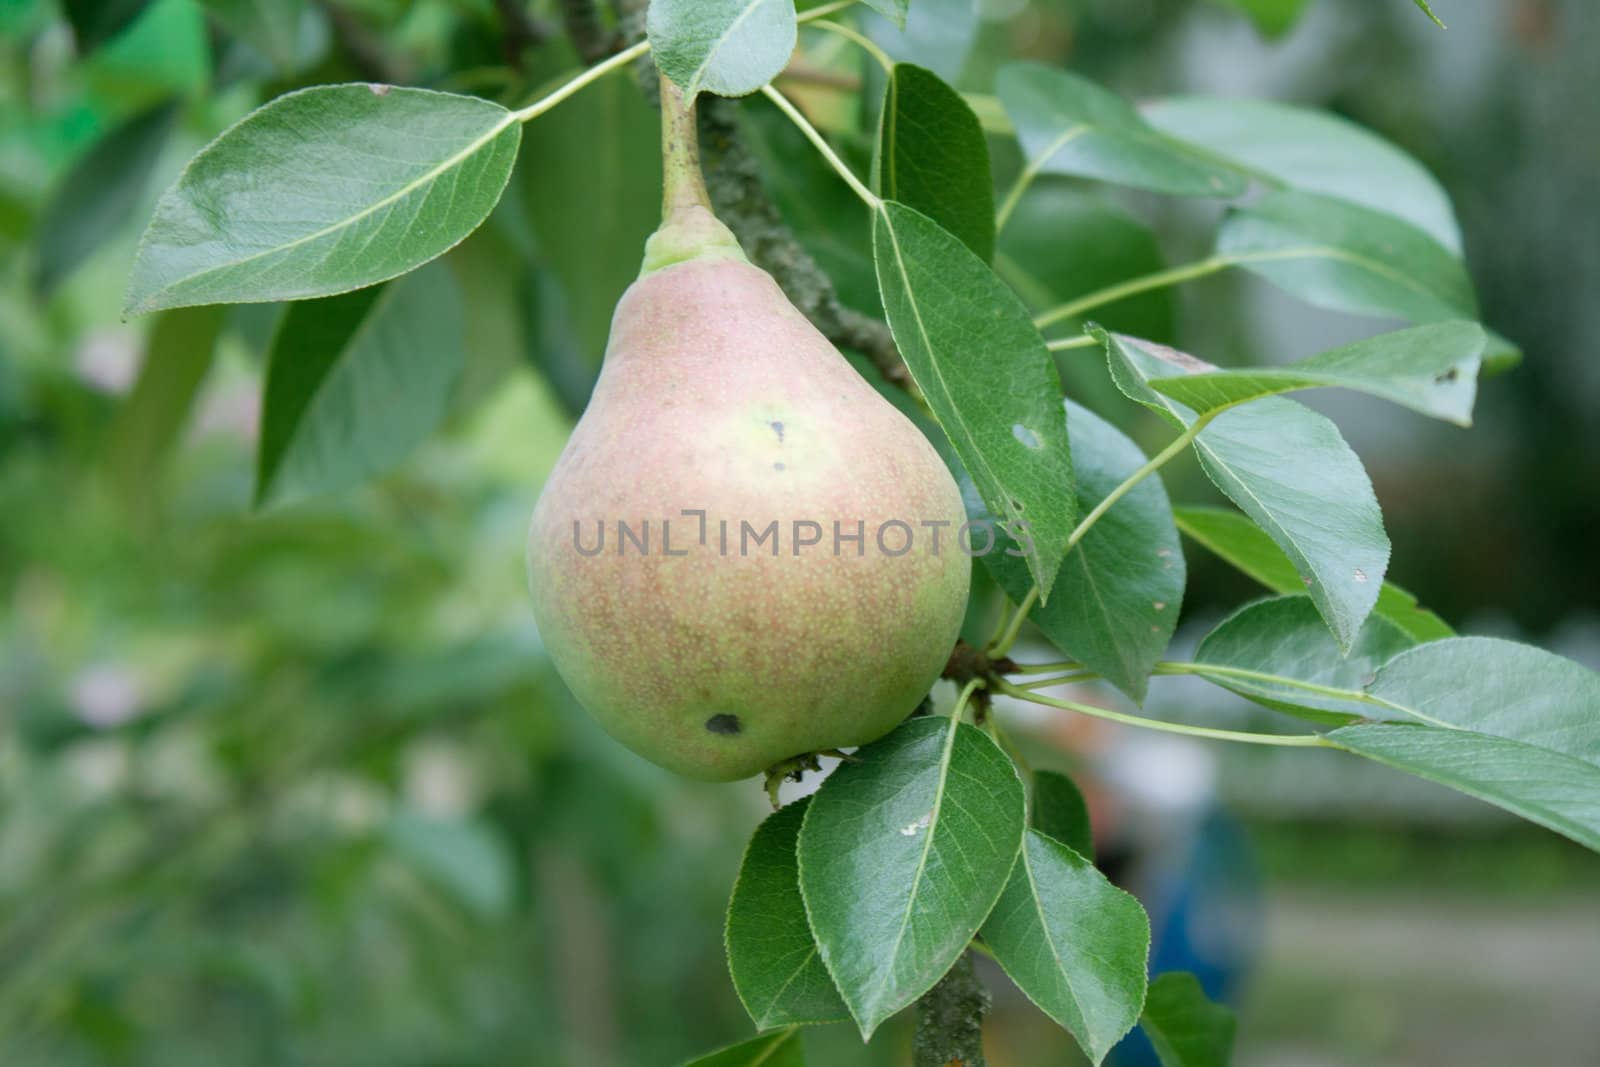 Pear on a branch hanging in the street shooting